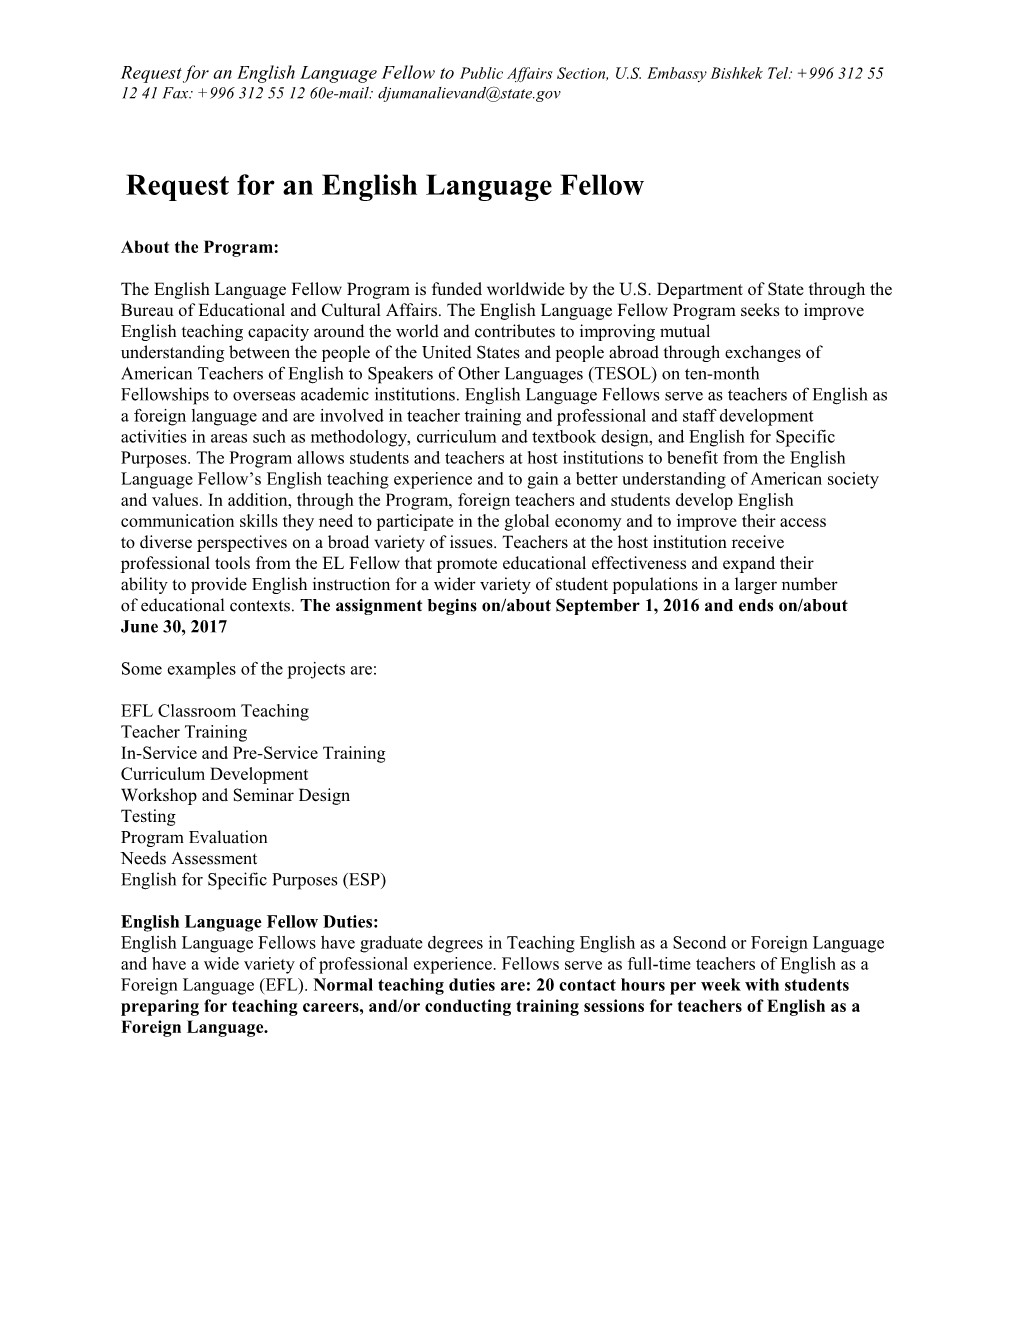 Request for an English Language Fellow